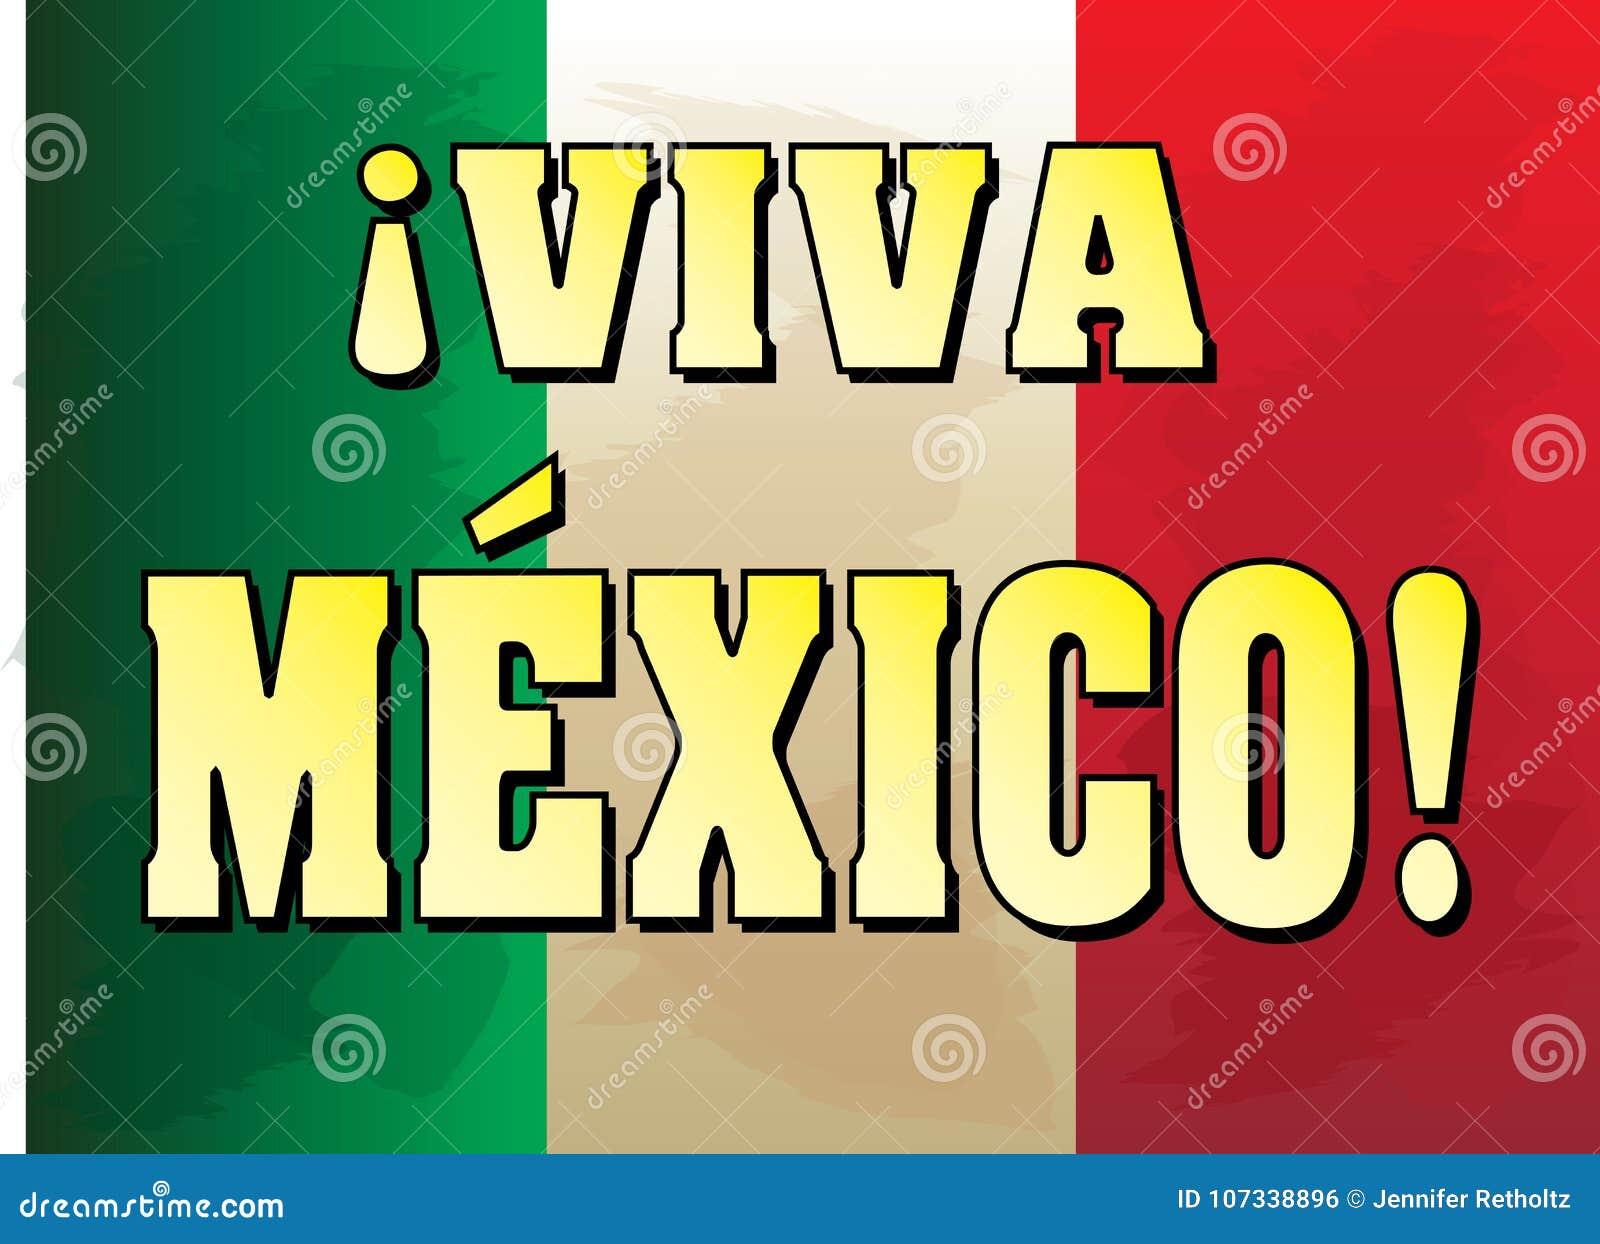 viva mexico! banner with mexican flag background